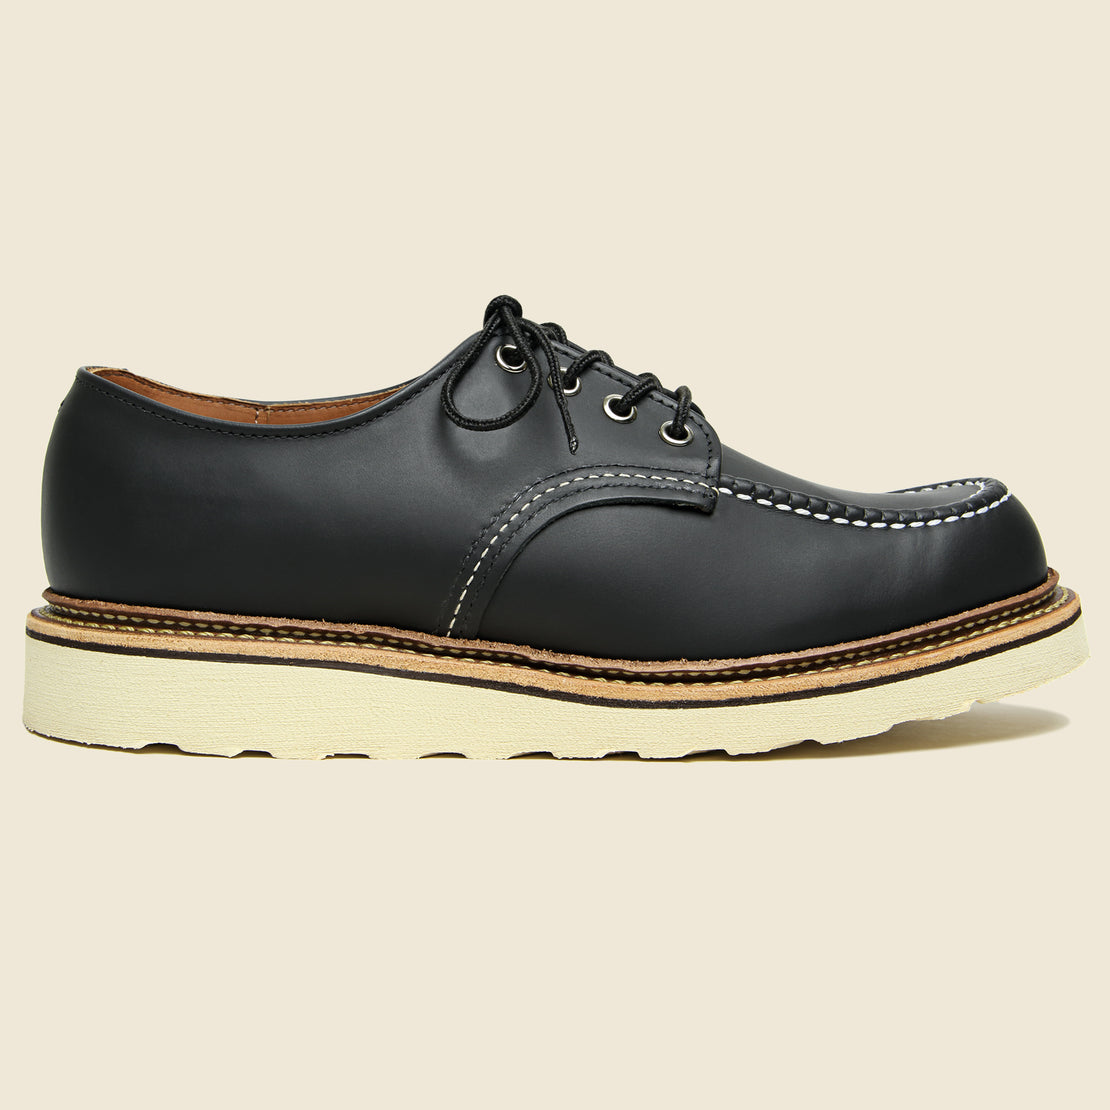 Red Wing Classic Oxford No. 8106 - Black Chrome